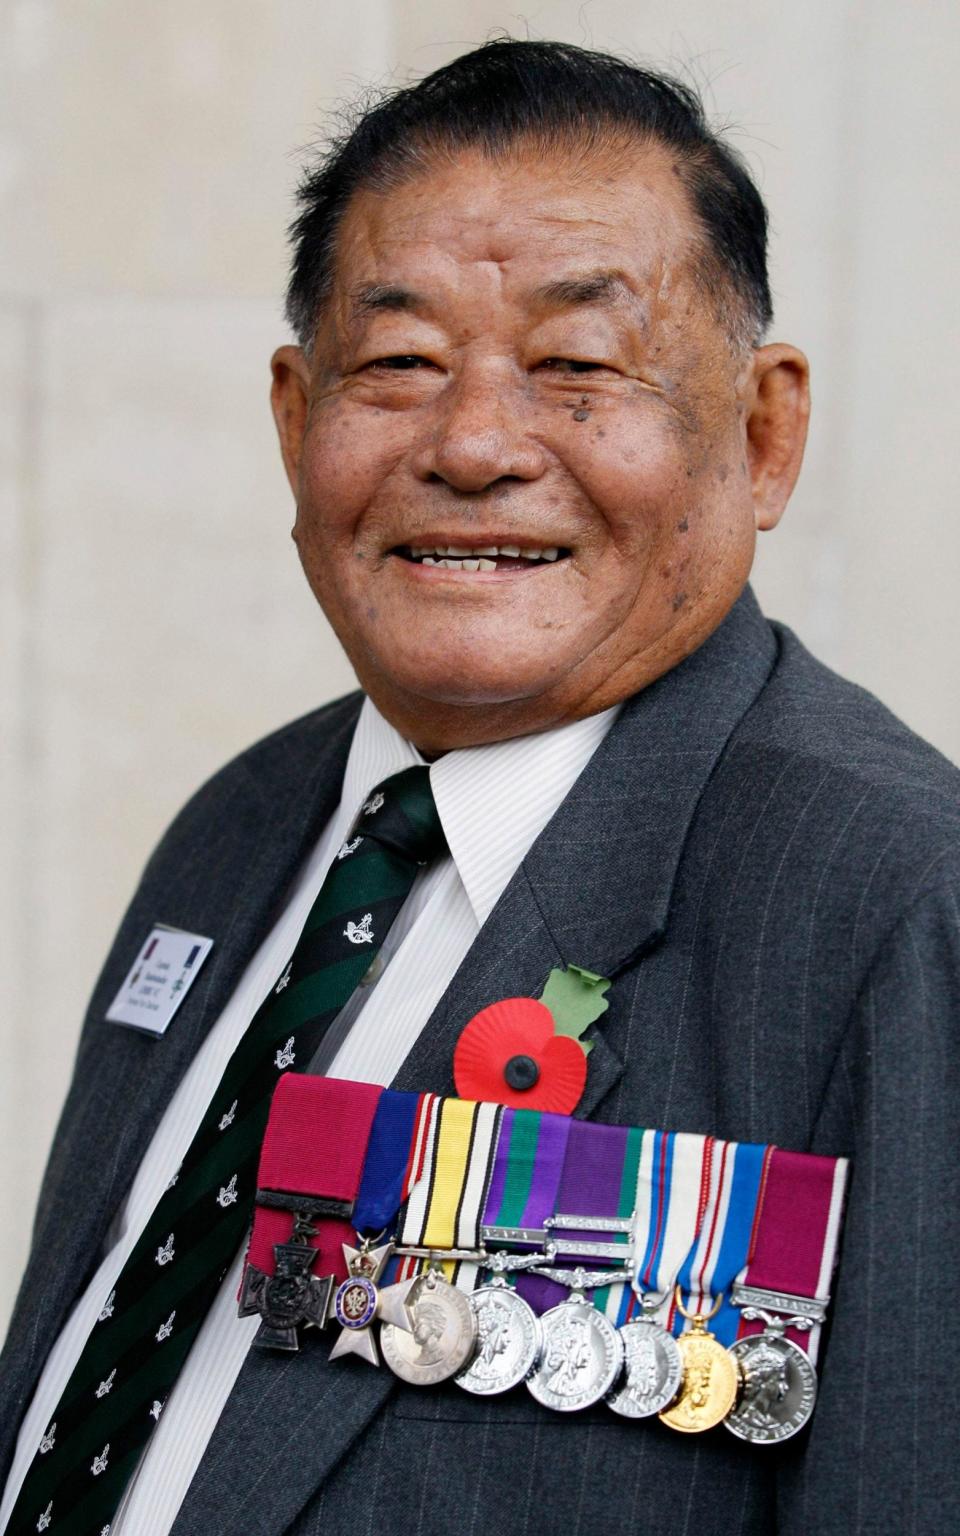 Limbu arrives at a service for the Victoria Cross and George Cross Association Reunion at St Martin-in-the-Fields in London in 2010 - Kirsty Wigglesworth/AP